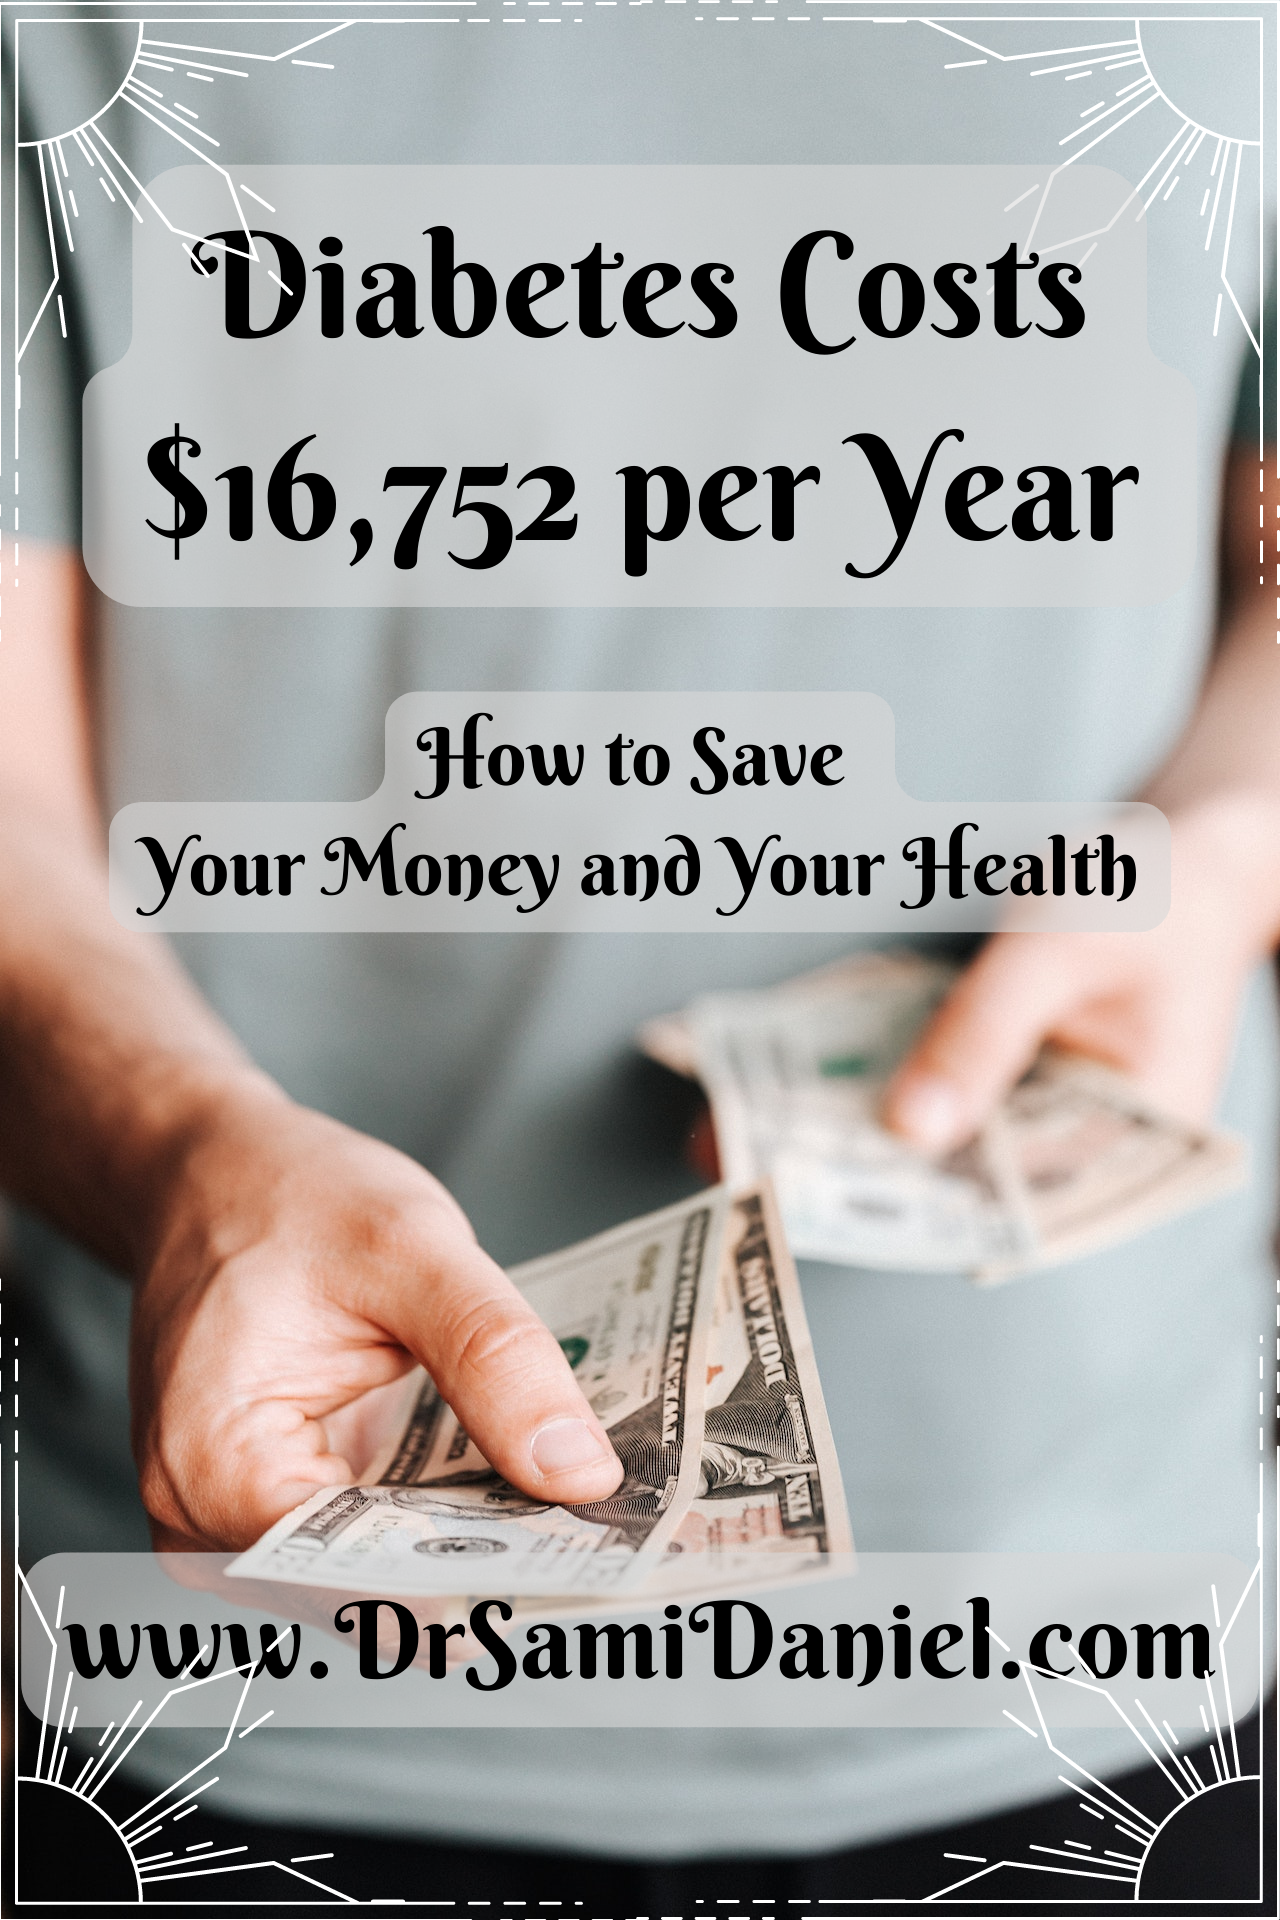 Diabetes Costs $16,752 per Year: How to Save Your Money AND Your Health